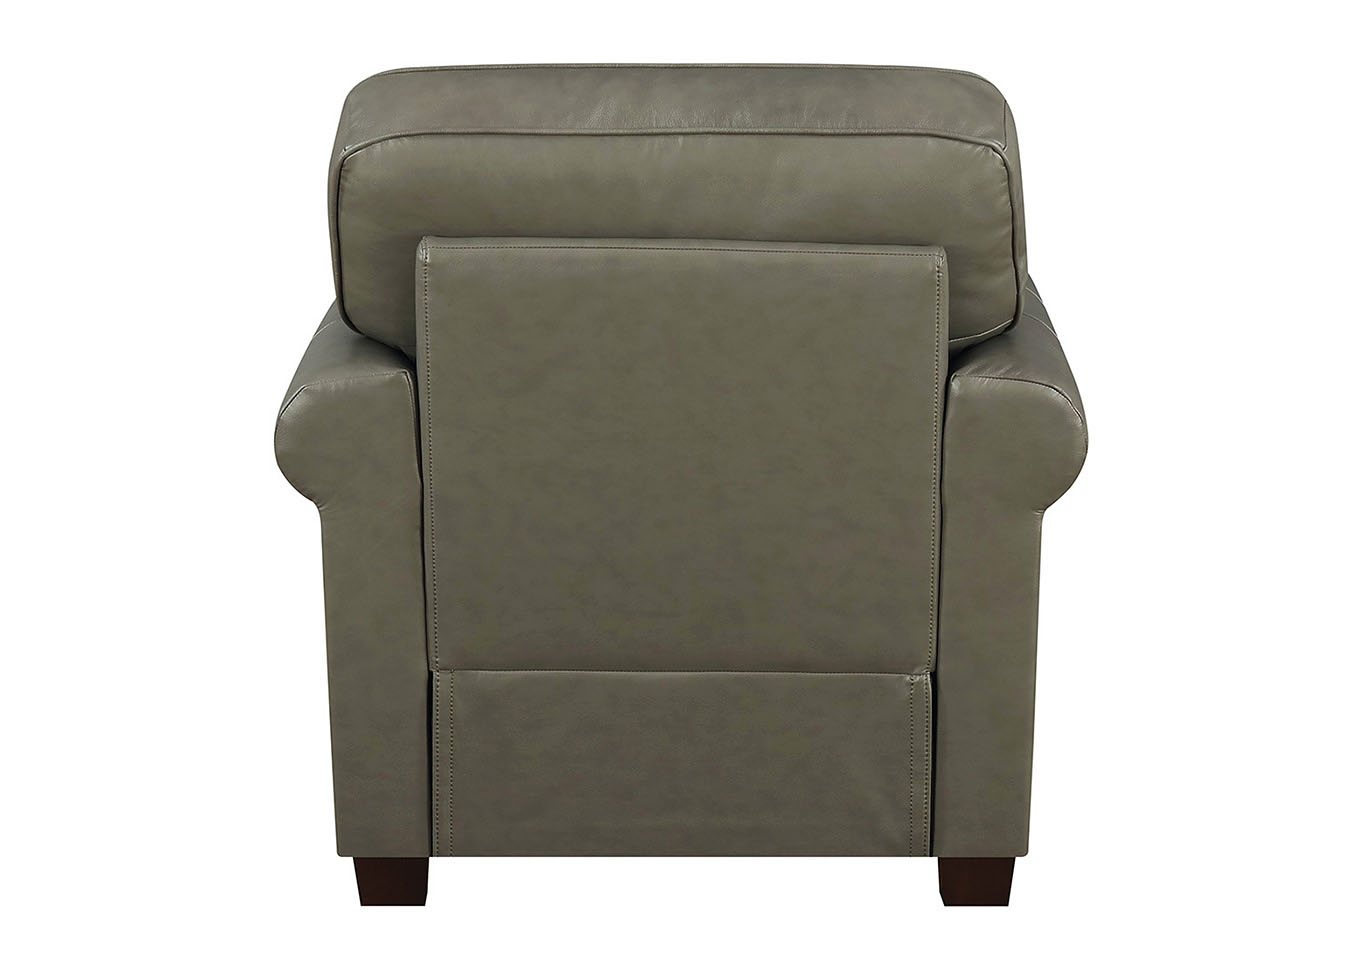 April Gray Leather Match Stationary Chair,Taba Home Furnishings